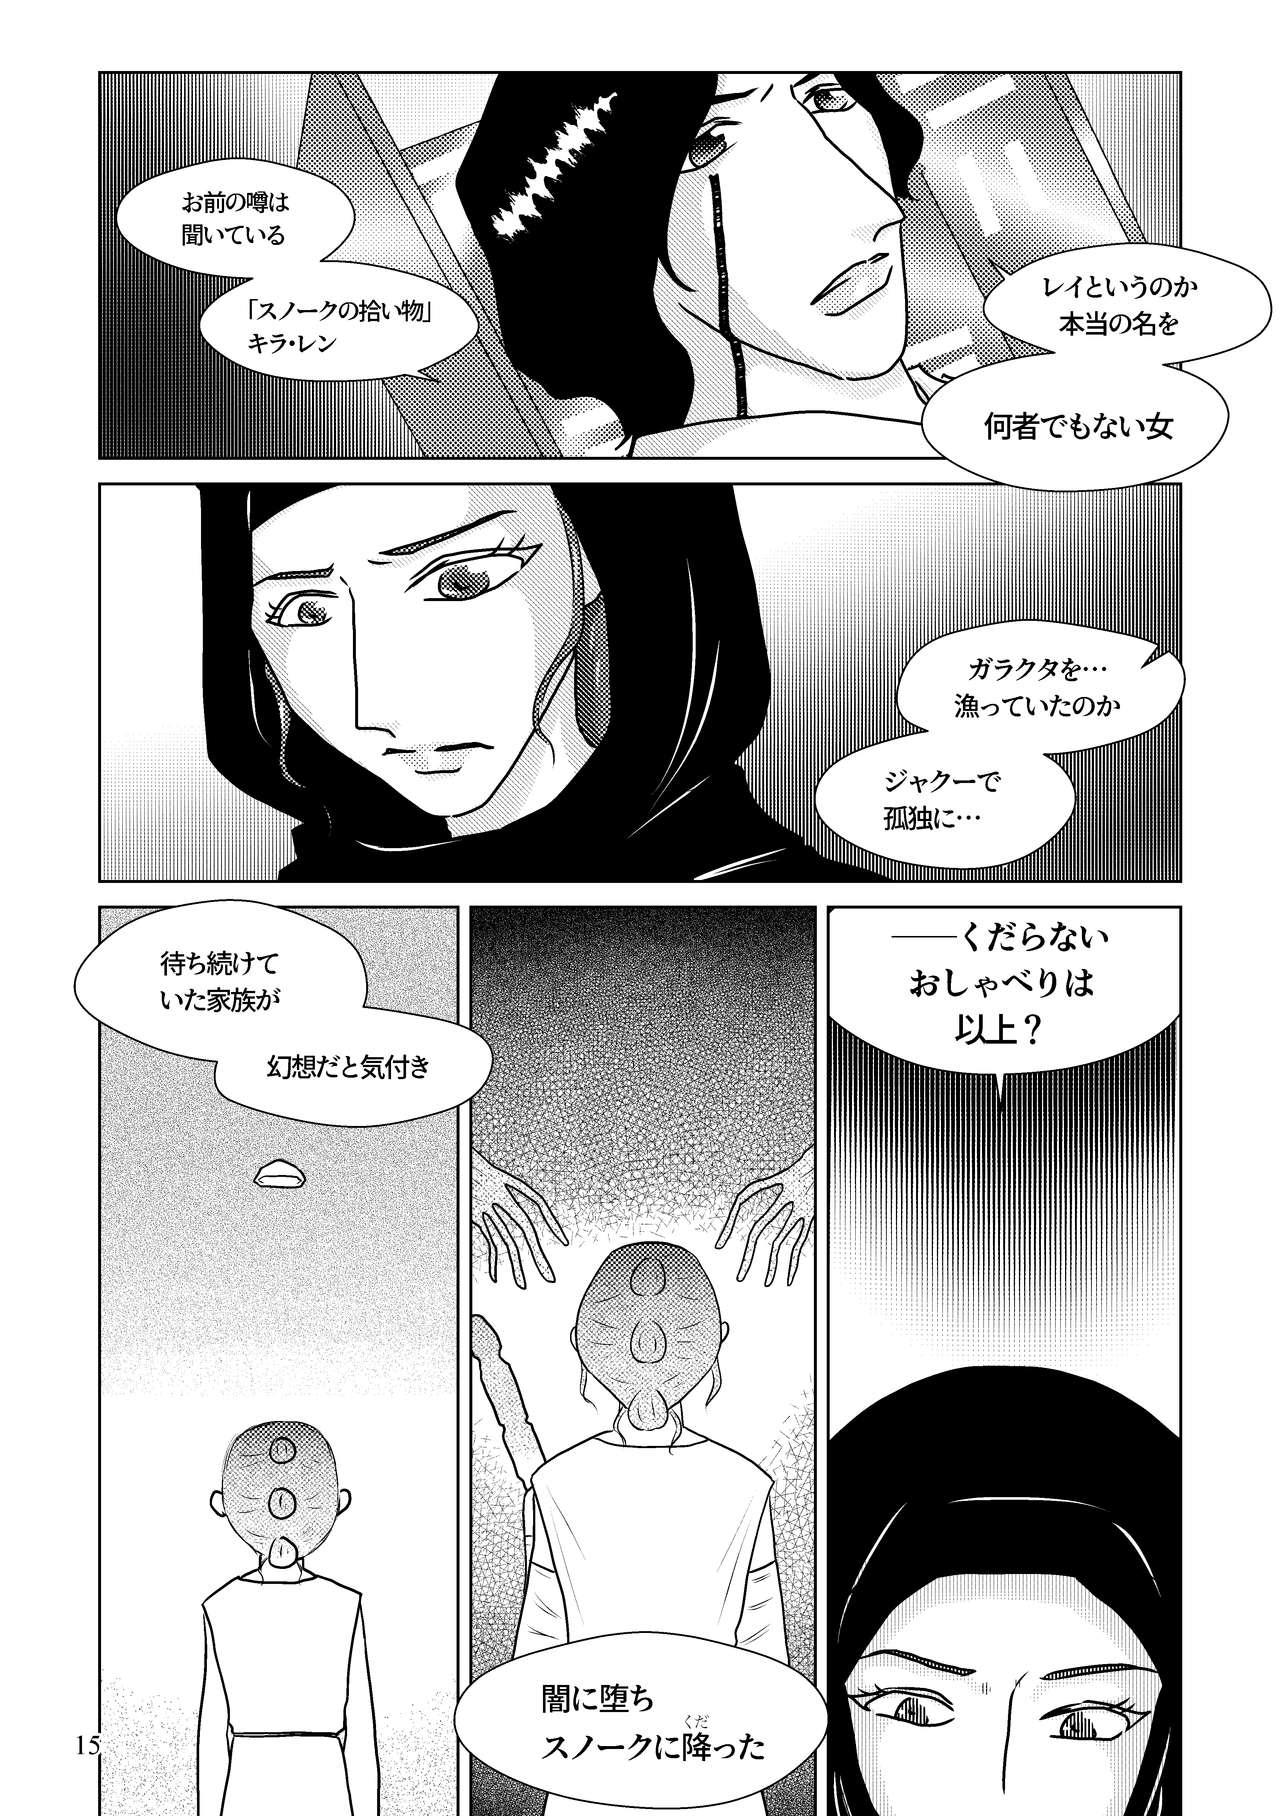 Husband Nothing But You Ch. 1-9 - Star wars Amature Sex - Page 5